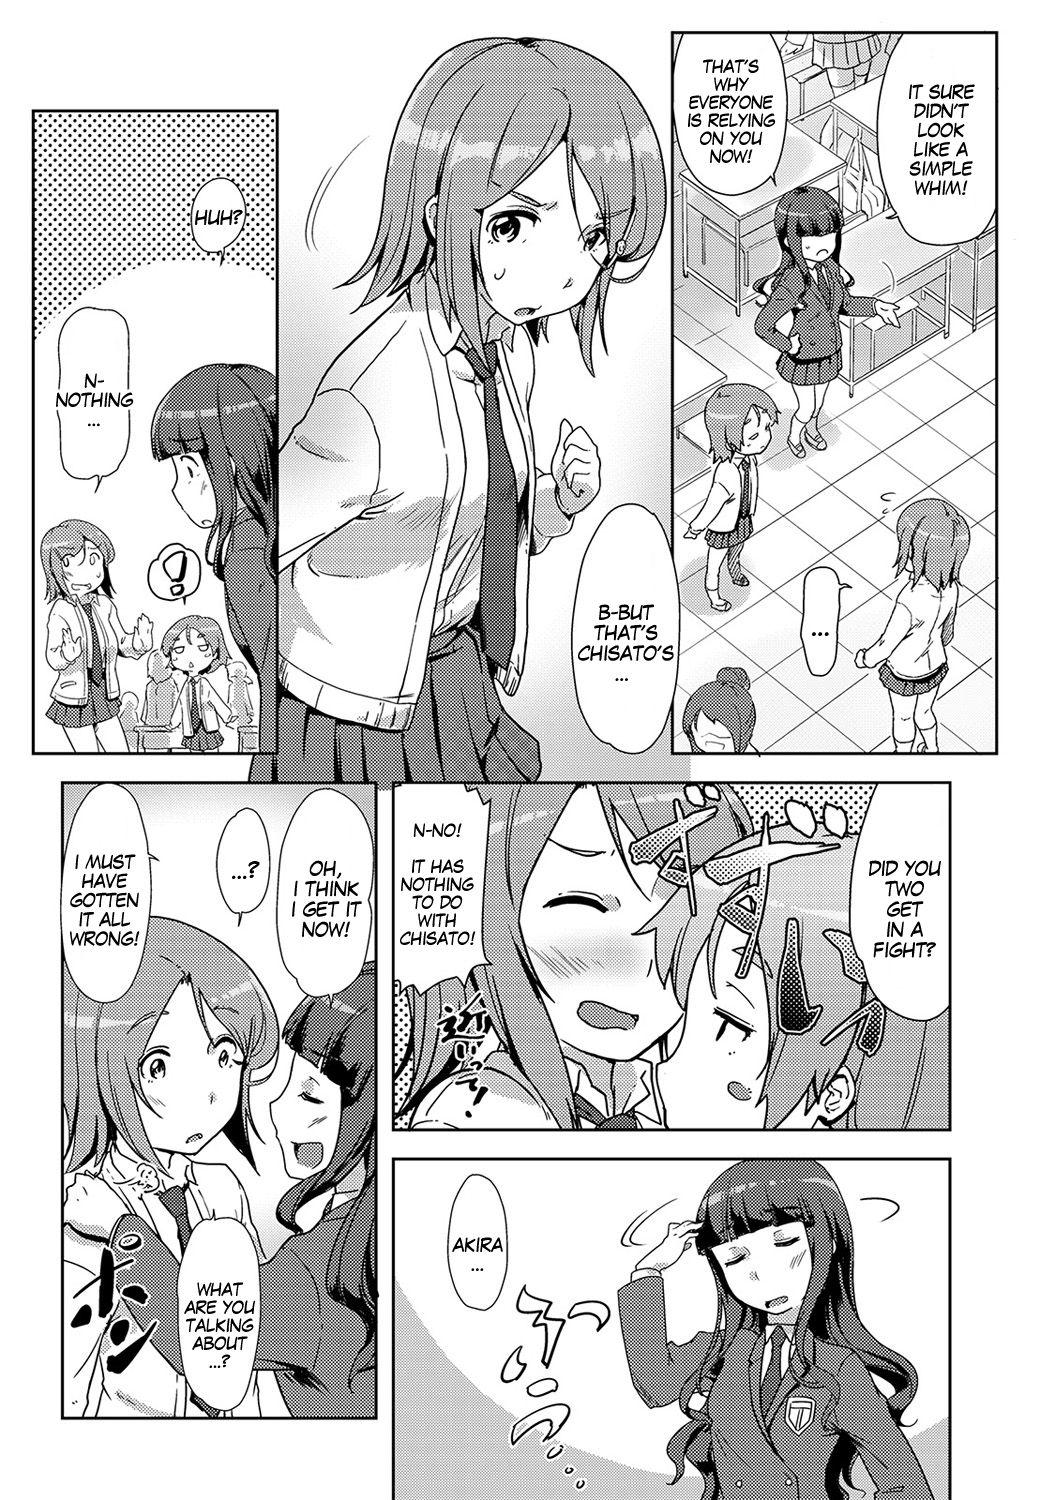 Letsdoeit Ecchi Shitara Irekawacchatta!? | We Switched Our Bodies After Having Sex!? Ch. 5 Web - Page 6